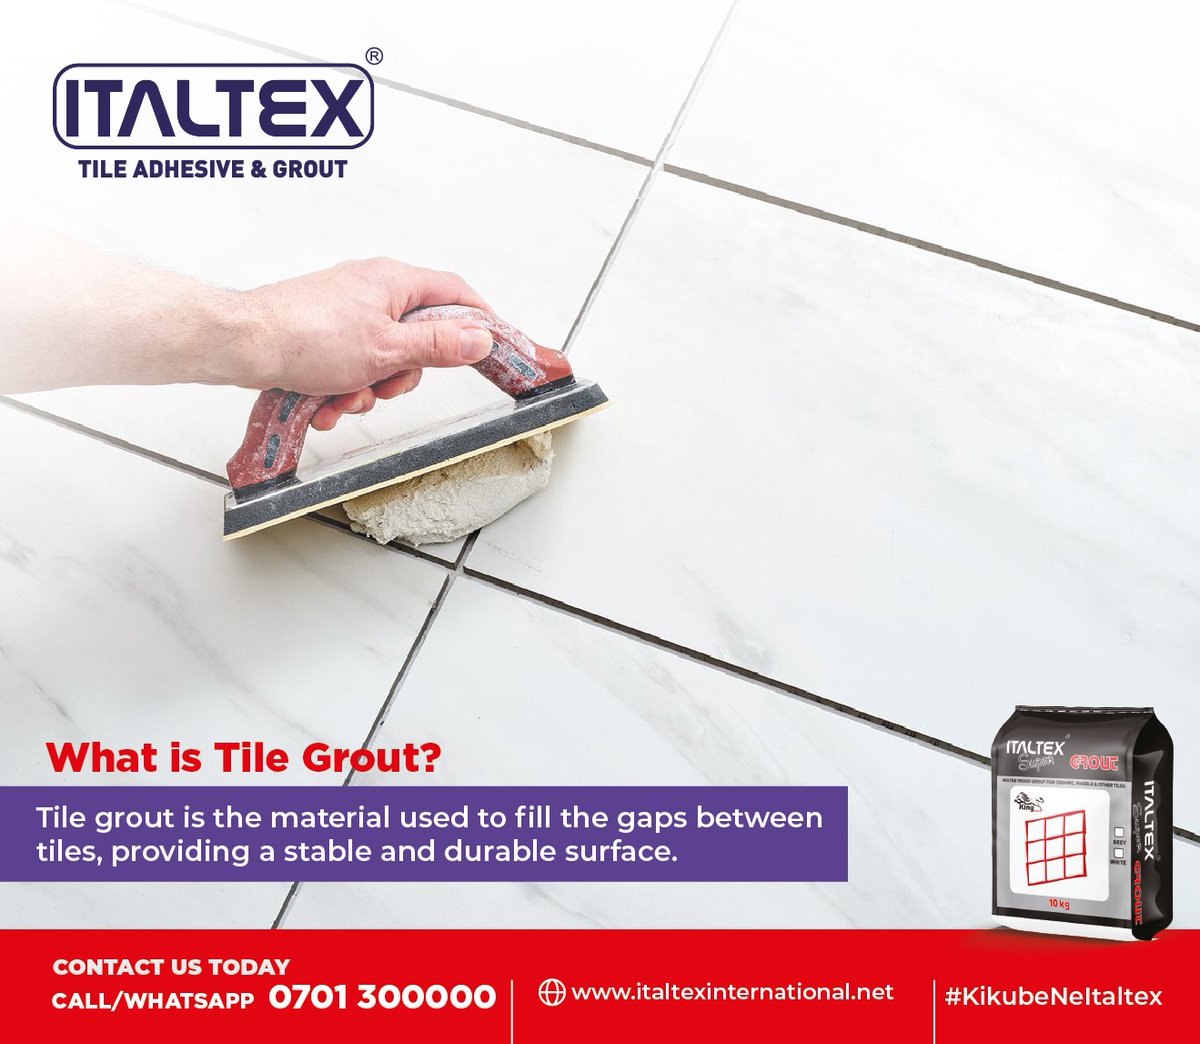 Tile Grout is important when it comes to tiling, many people use it but don't know what it is exactly.
Let's break it down for you.

To purchase, call: 0701300000

#italtex #tilegrout